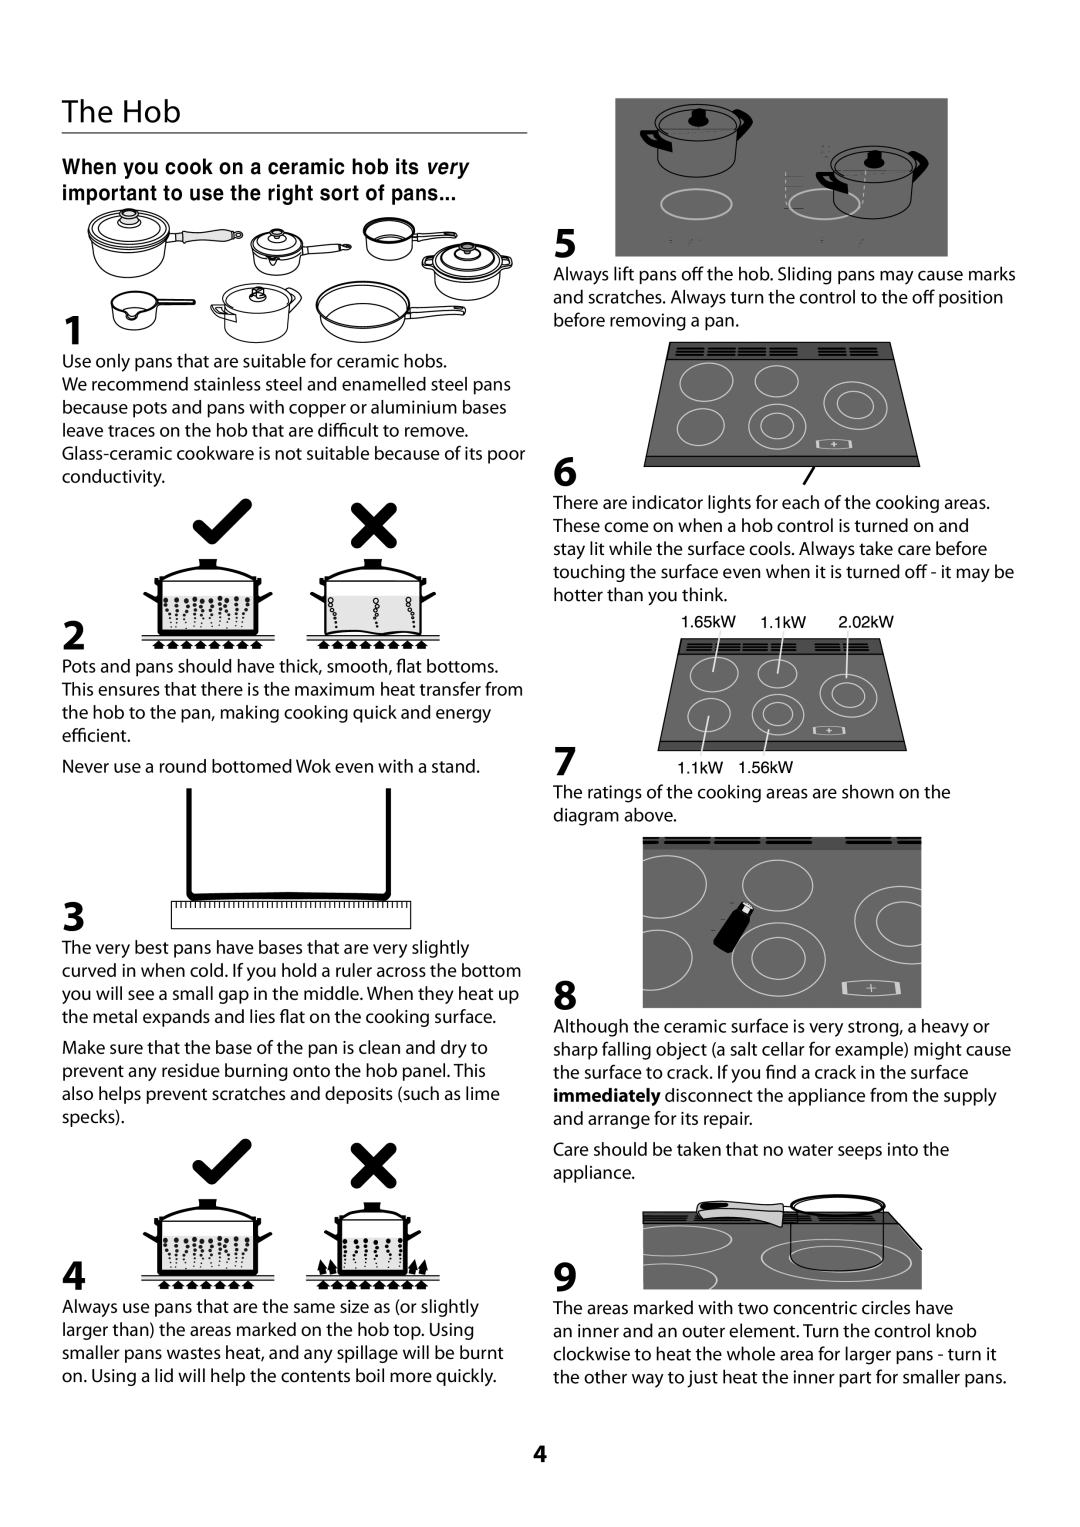 Rangemaster U109720 - 01 manual The Hob, When you cook on a ceramic hob its very, important to use the right sort of pans 